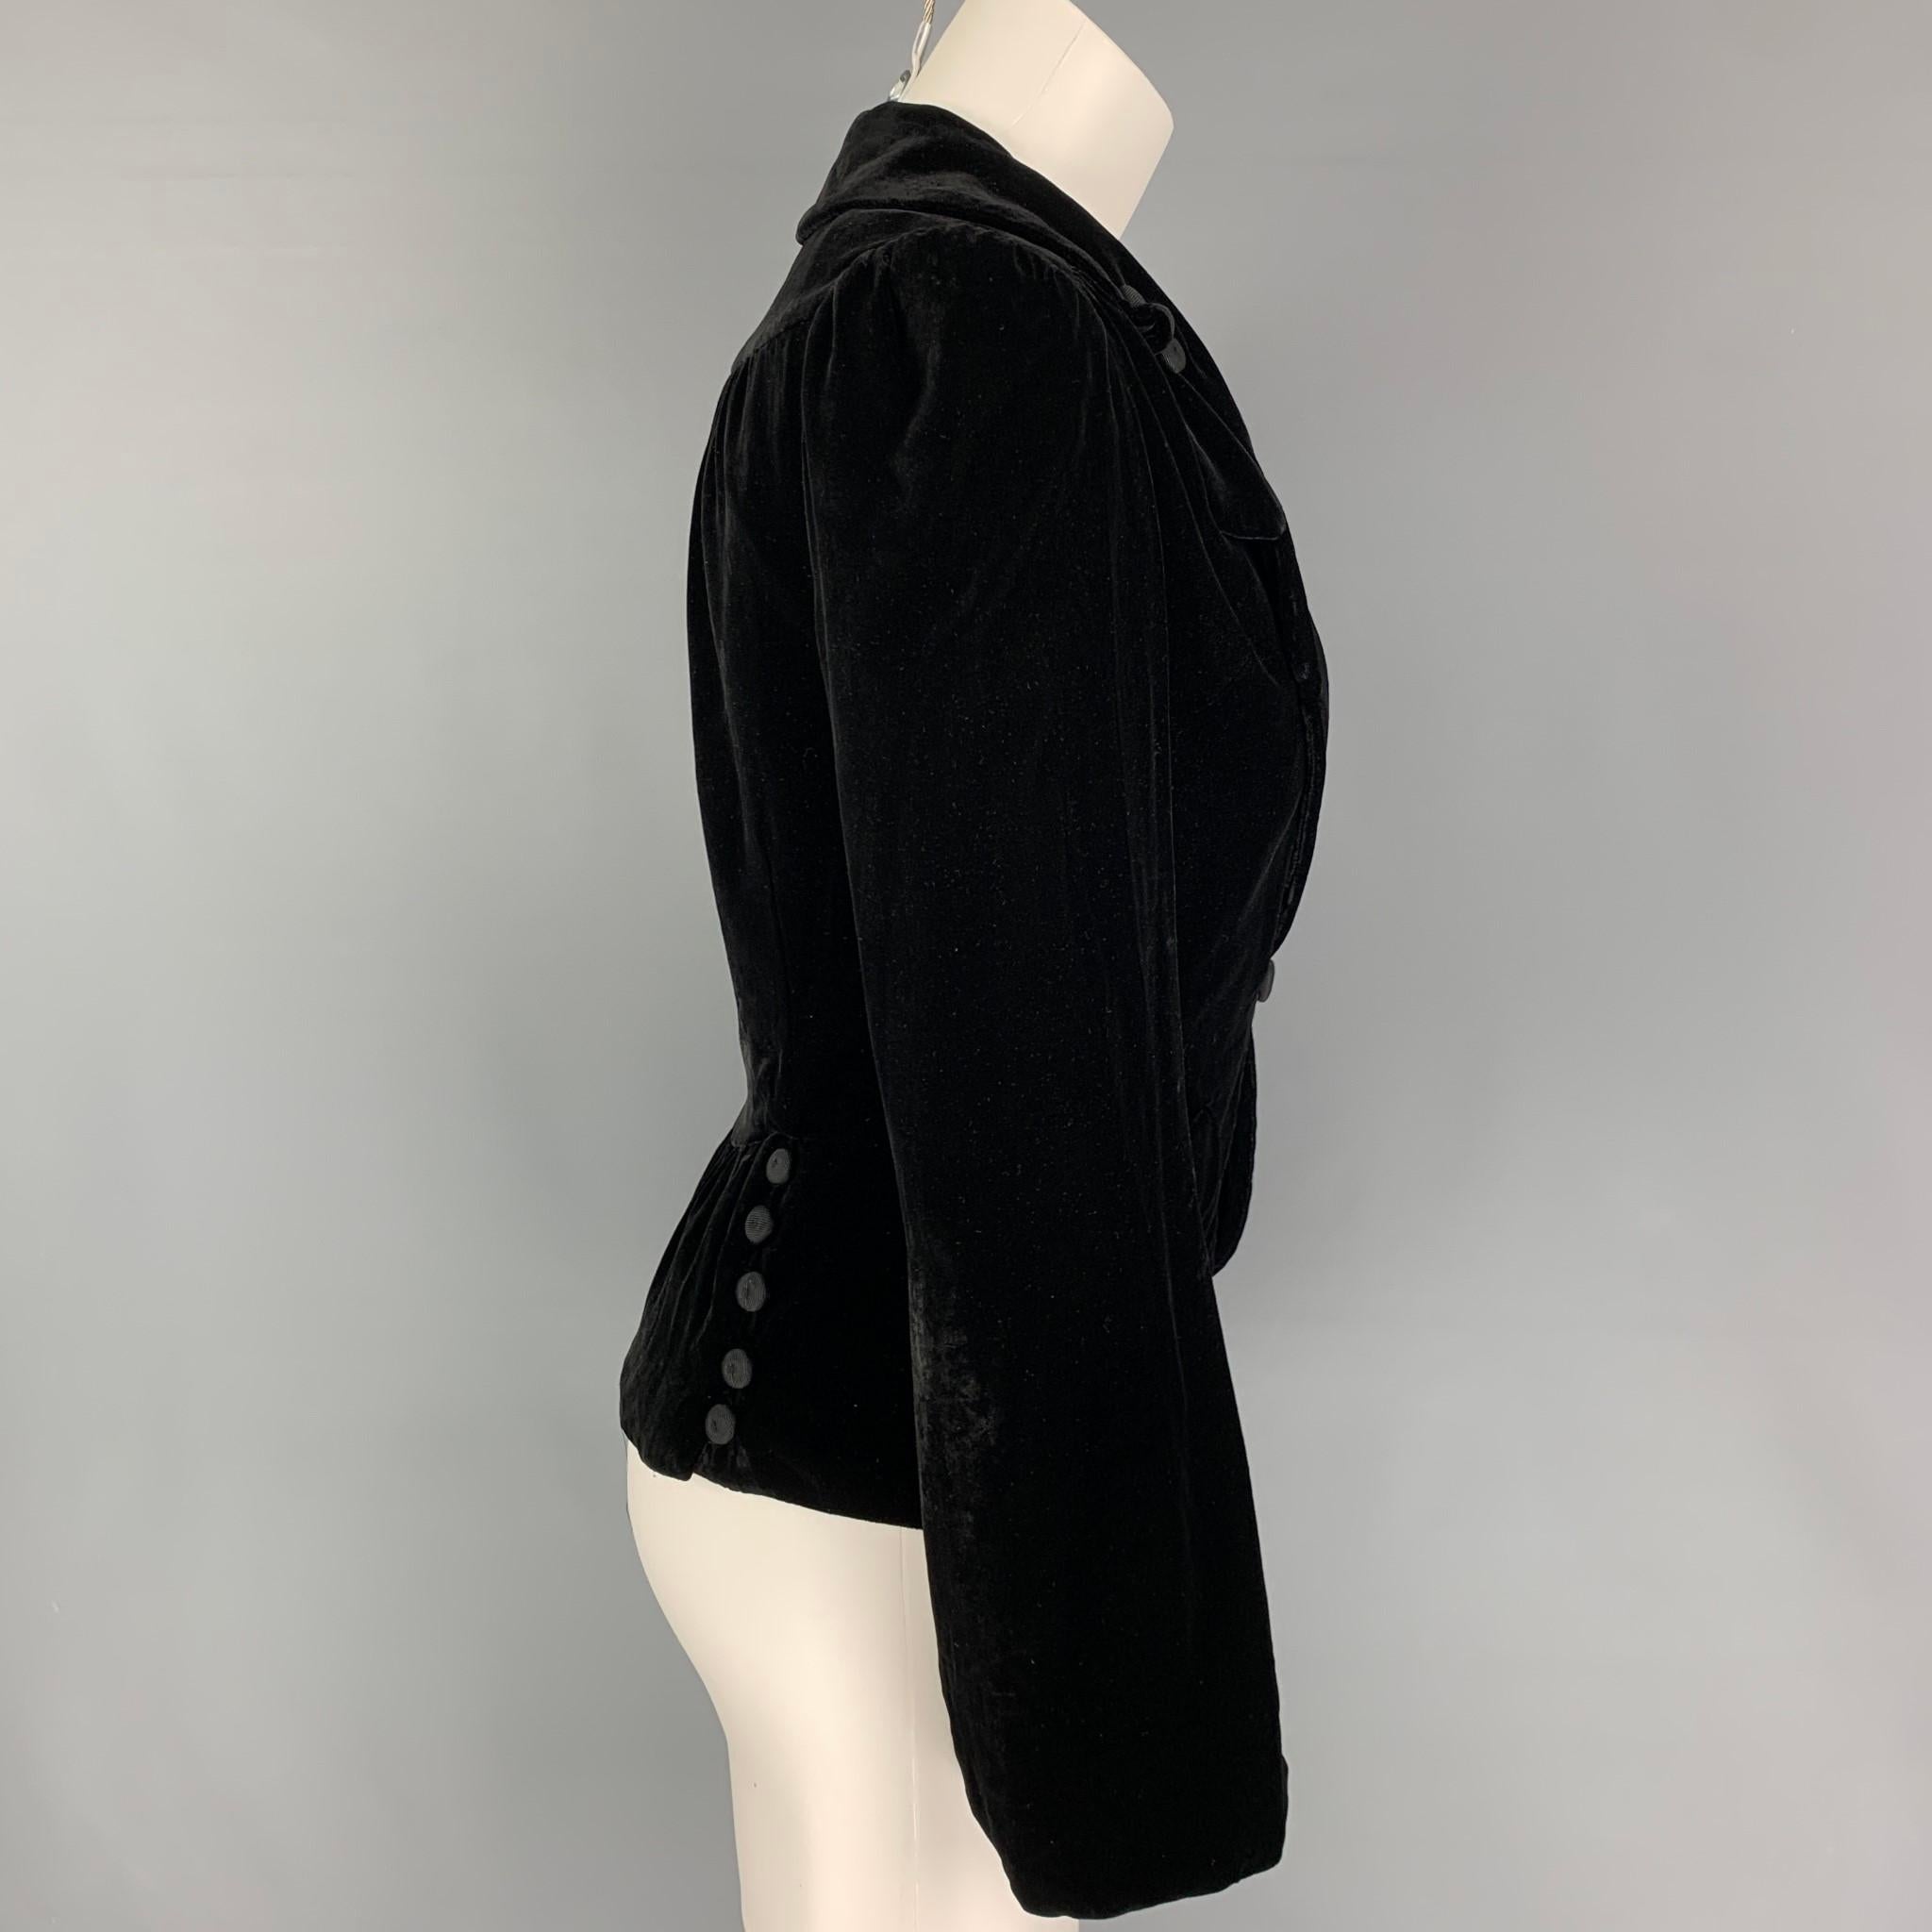 MARC JACOBS jacket comes in a black velvet rayon blend featuring a notch lapel, flap pockets, buttoned details, and a single button closure. 

Very Good Pre-Owned Condition.
Marked: 2

Measurements:

Shoulder: 14 in.
Bust: 34 in.
Sleeve: 24